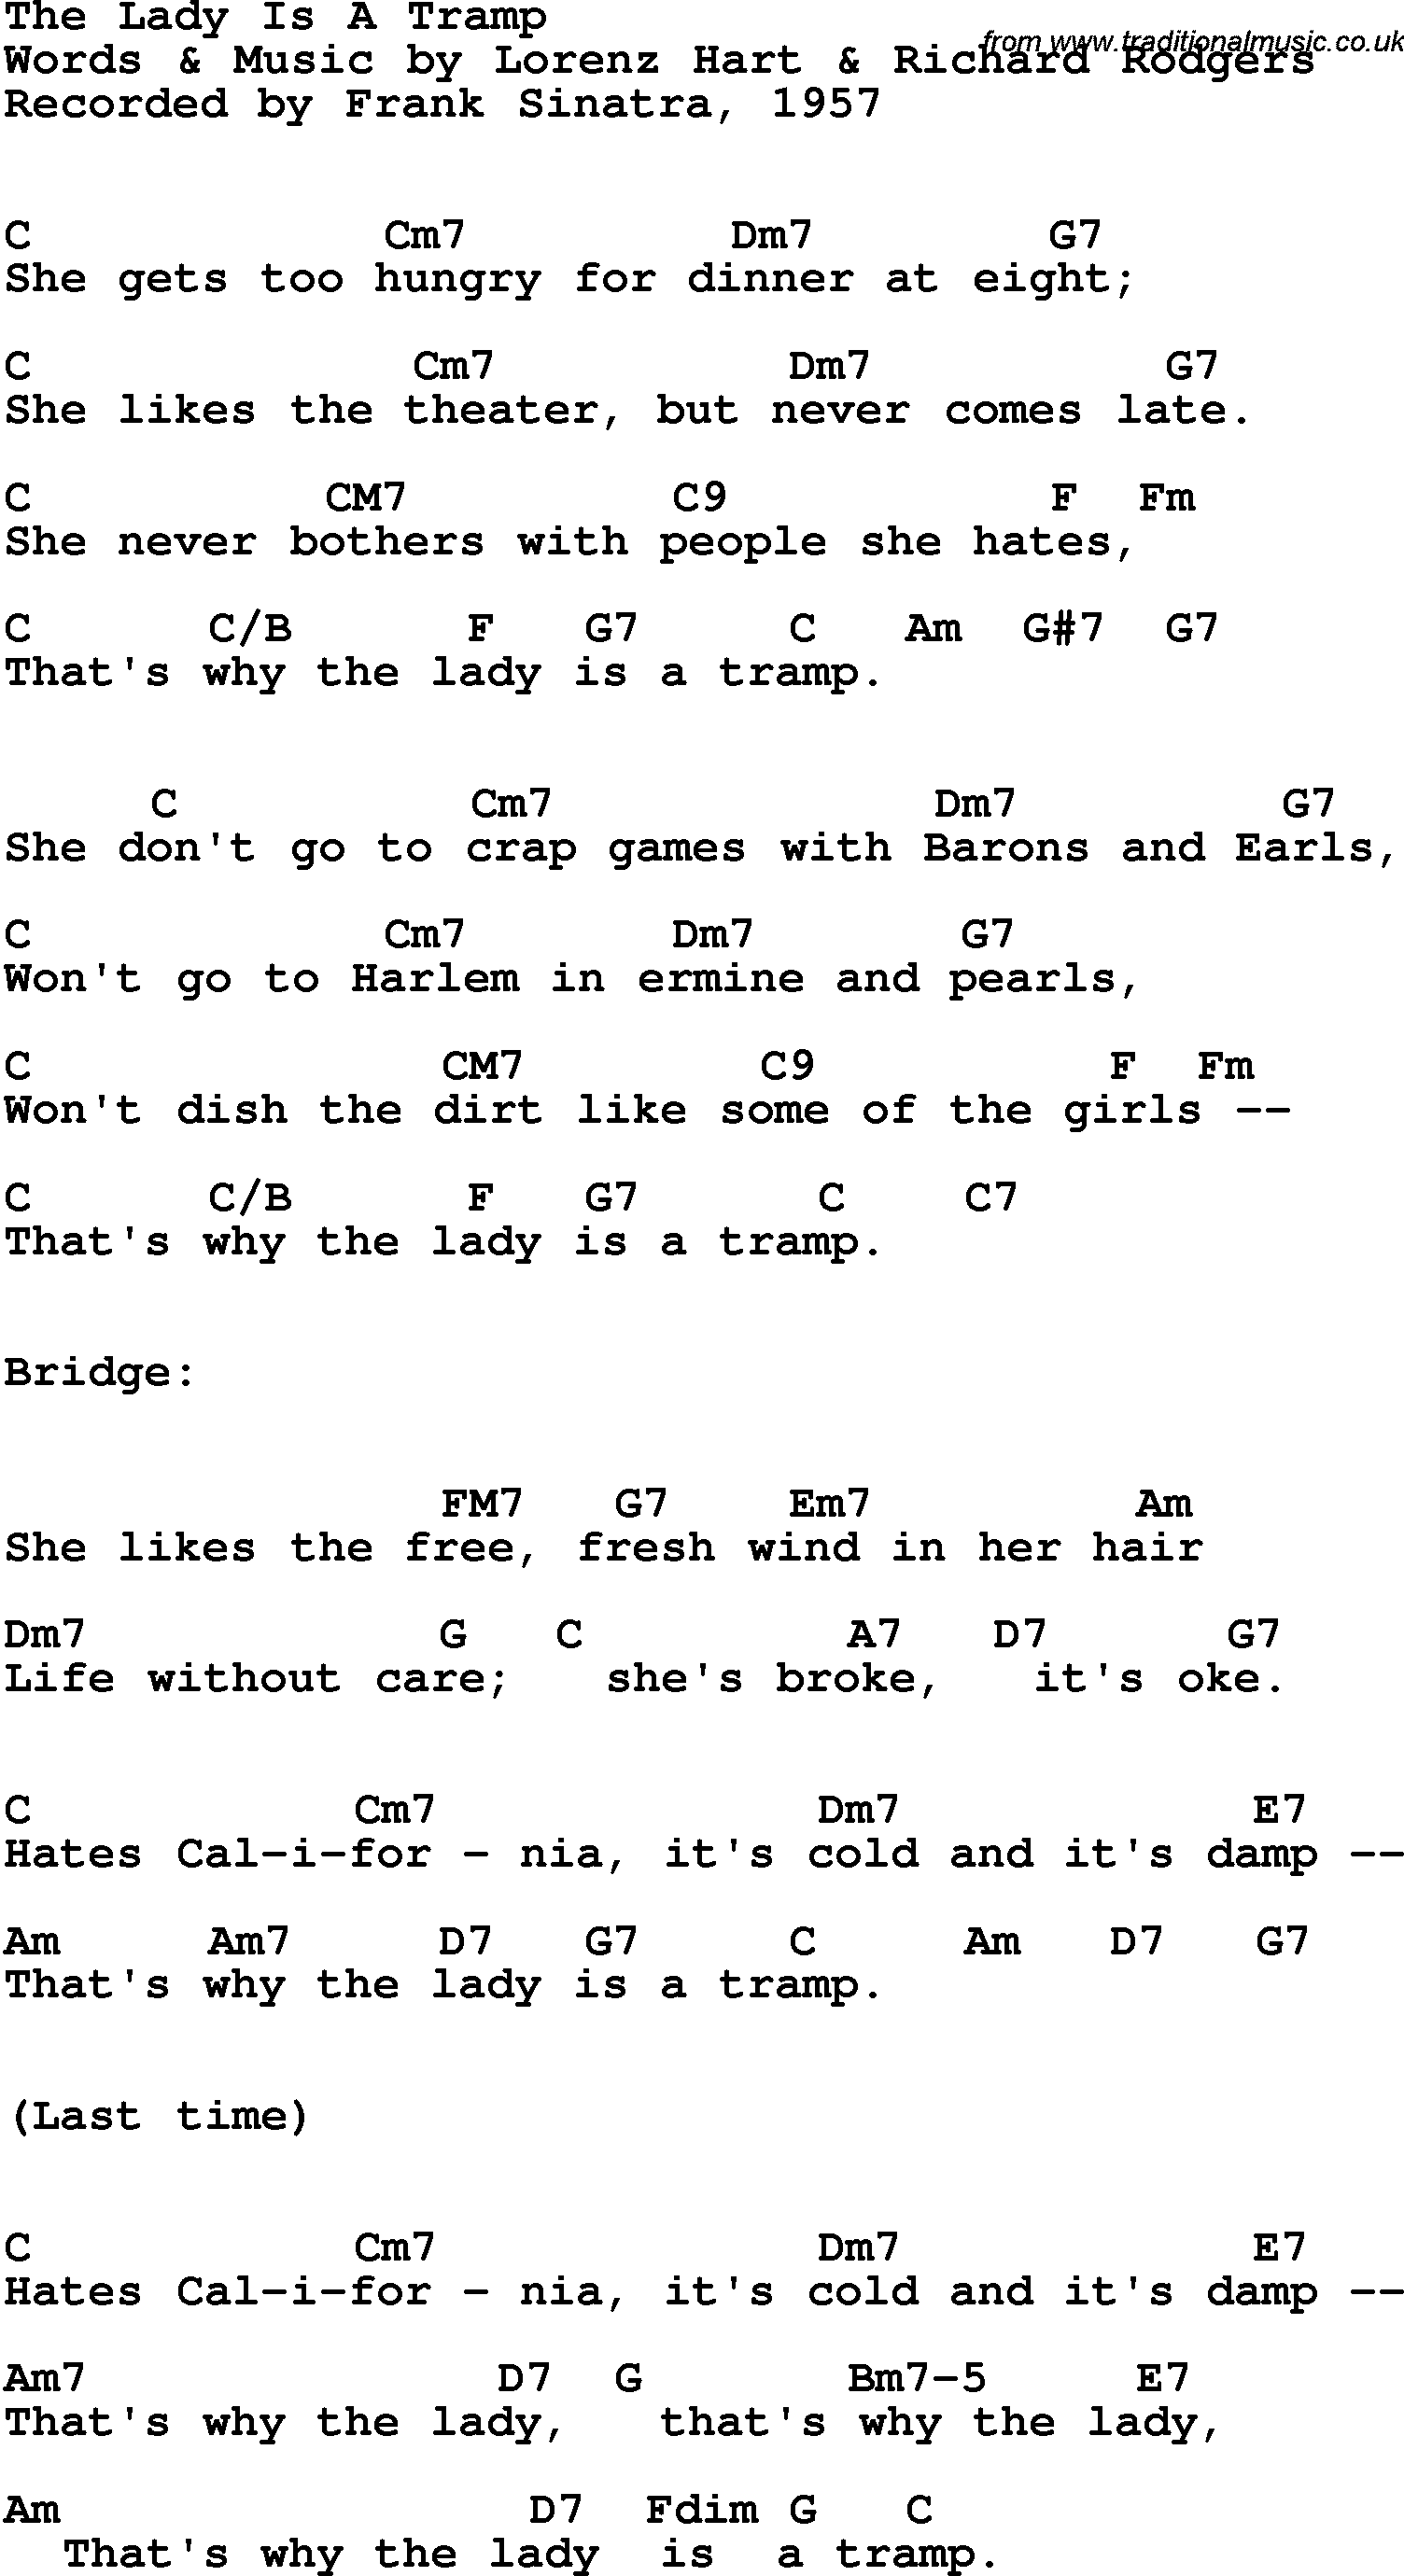 Song Lyrics with guitar chords for Lady Is A Tramp, The - Frank Sinatra, 1957